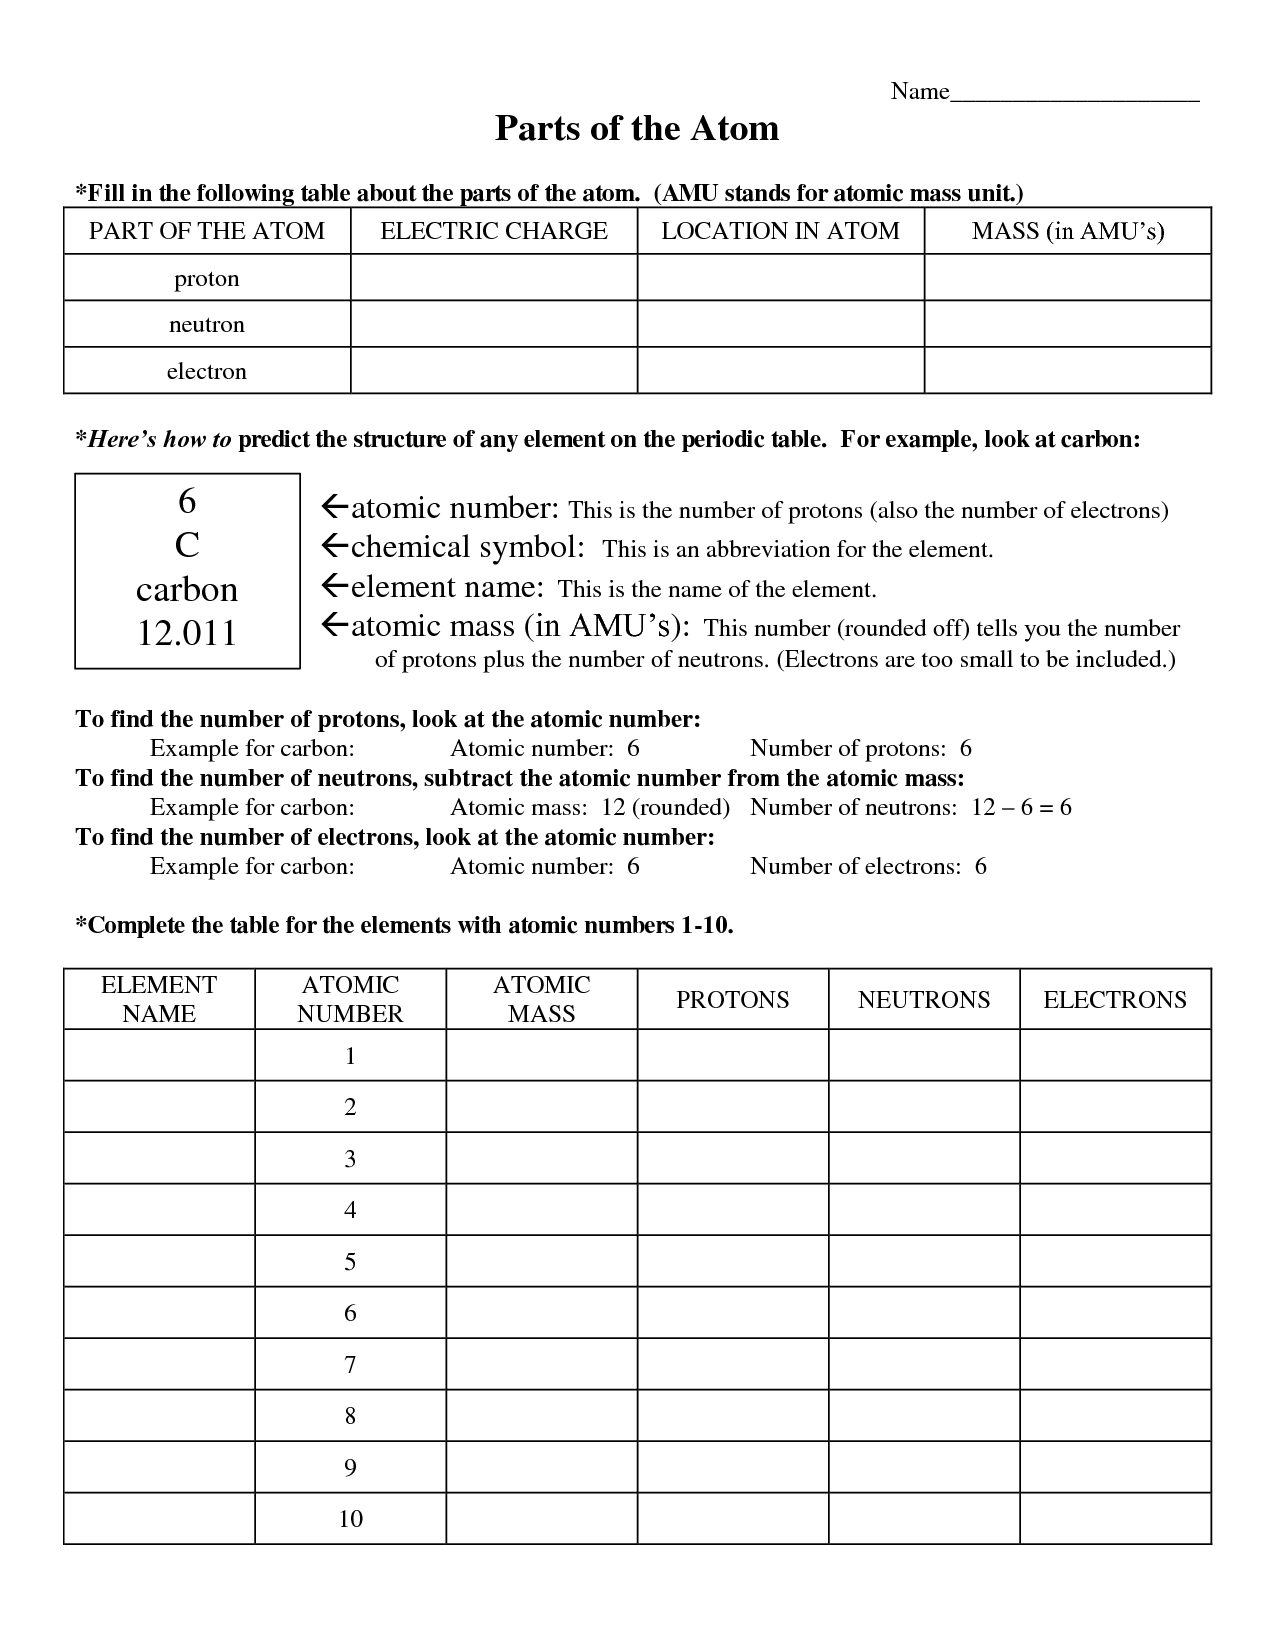 Atoms And Isotopes Worksheet